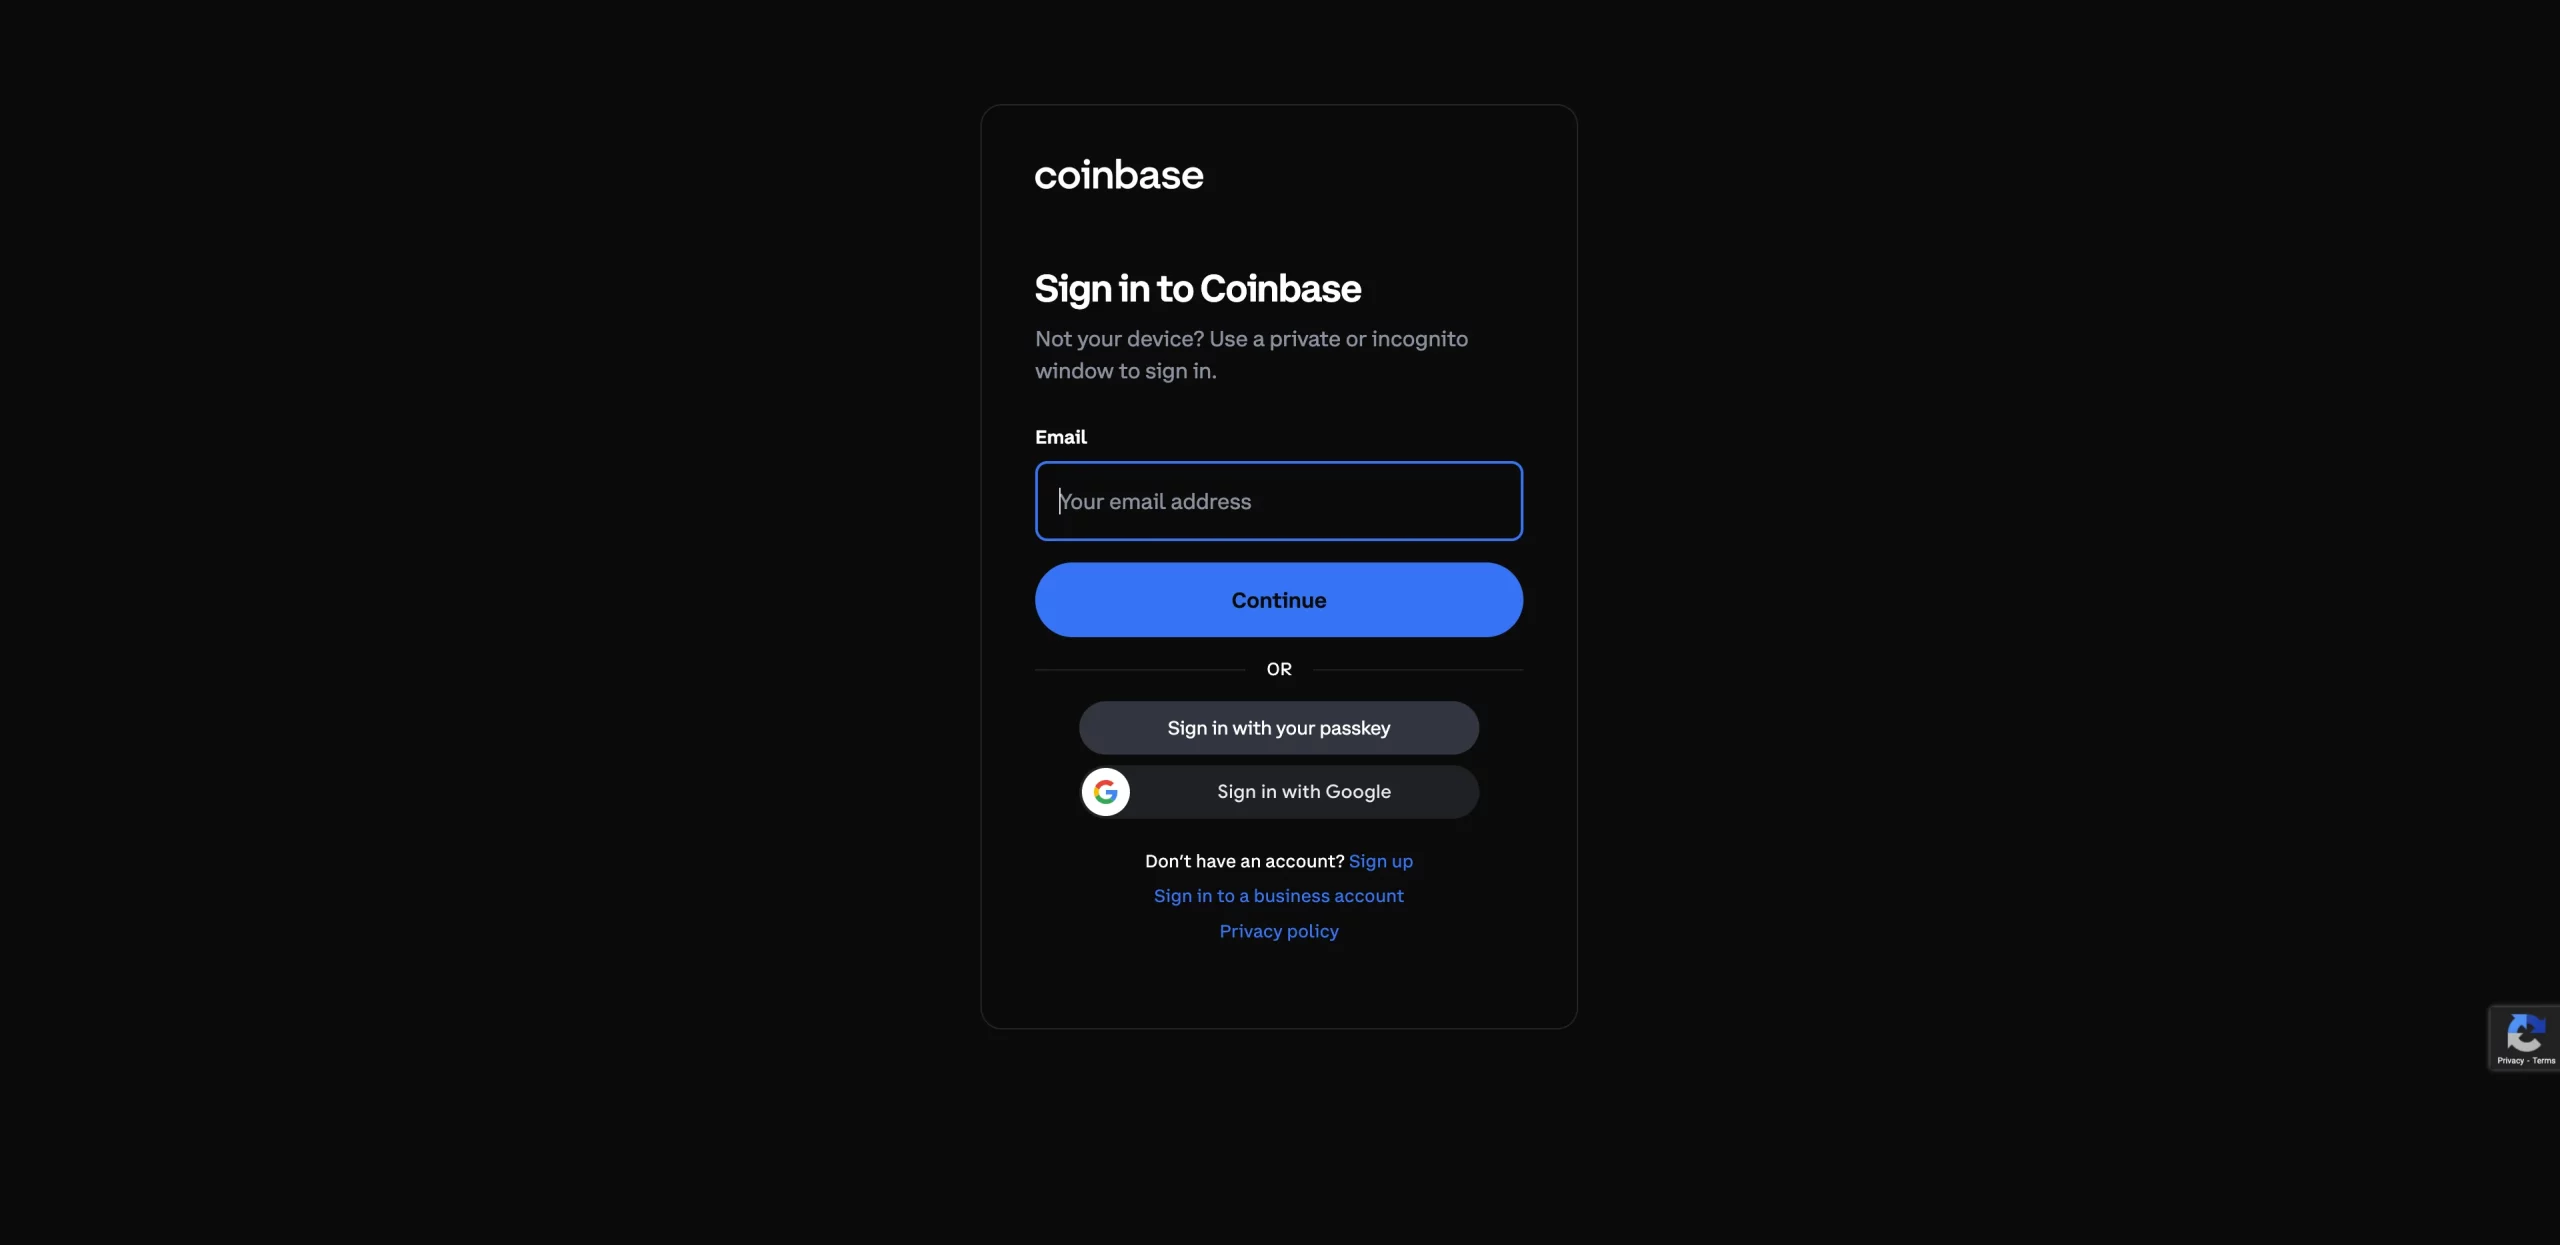 Sign In to Coinbase